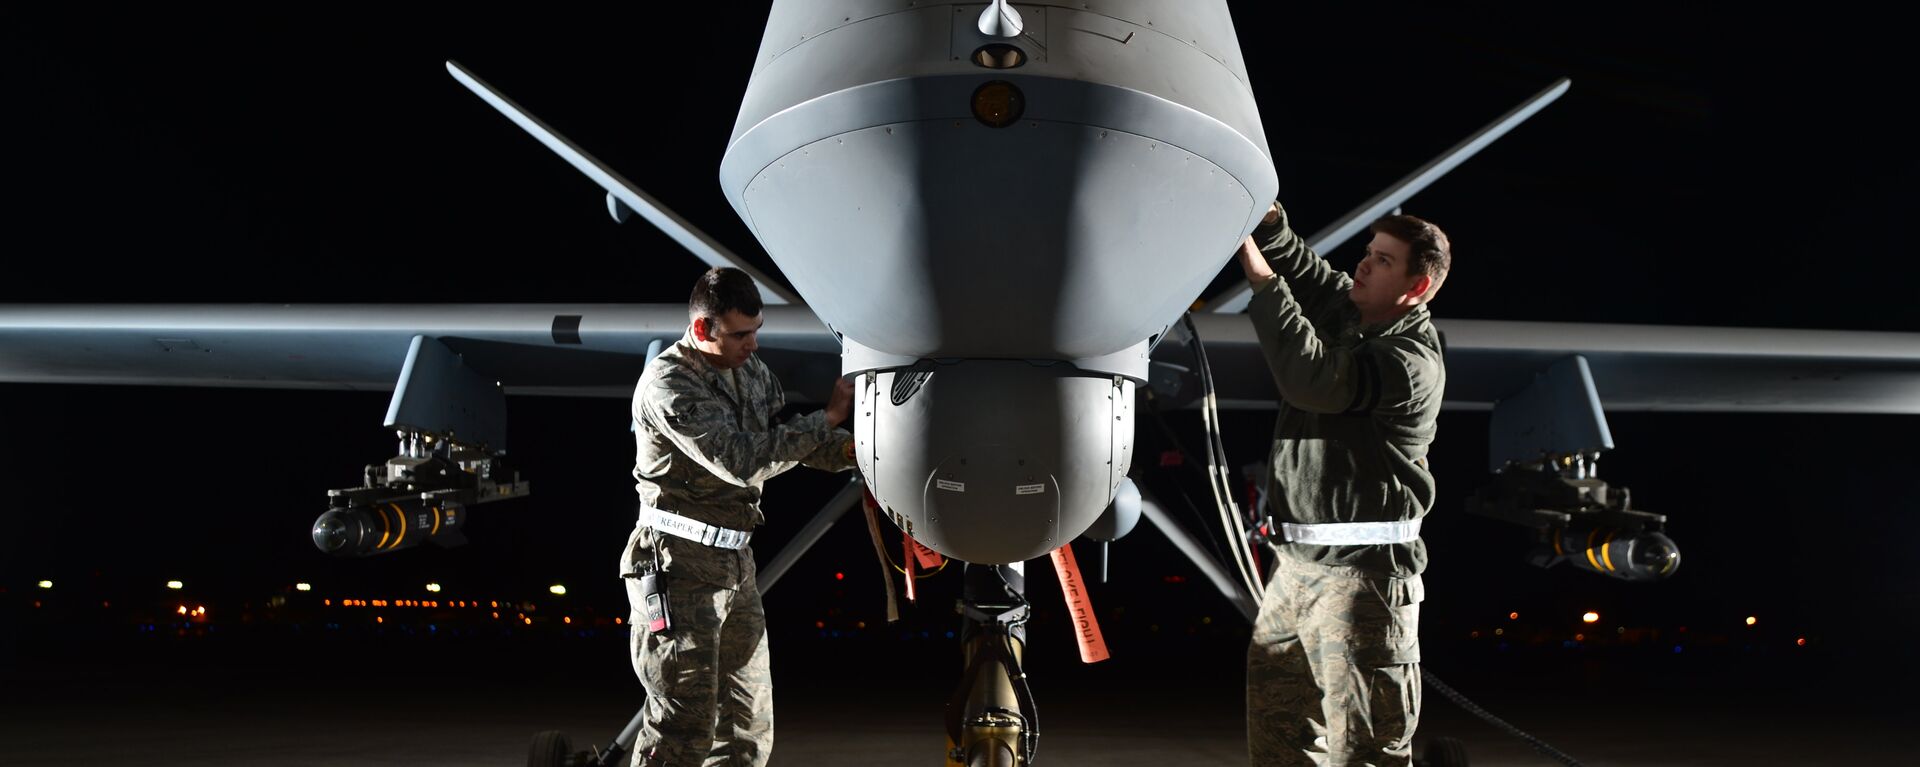 Airman 1st Class Steven (left) and Airman 1st Class Taylor prepare an MQ-9 Reaper for flight during exercise Combat Hammer, May 15, 2014, at Creech Air Force Base, Nev. Reaper crews flew a week-long mission, where they released the GBU-12 Paveway II and AGM-114 Hellfire munitions. Steven and Taylor are MQ-9 Reaper crew chiefs from the 432nd Aircraft Maintenance Squadron.  - اسپوتنیک افغانستان  , 1920, 01.02.2023